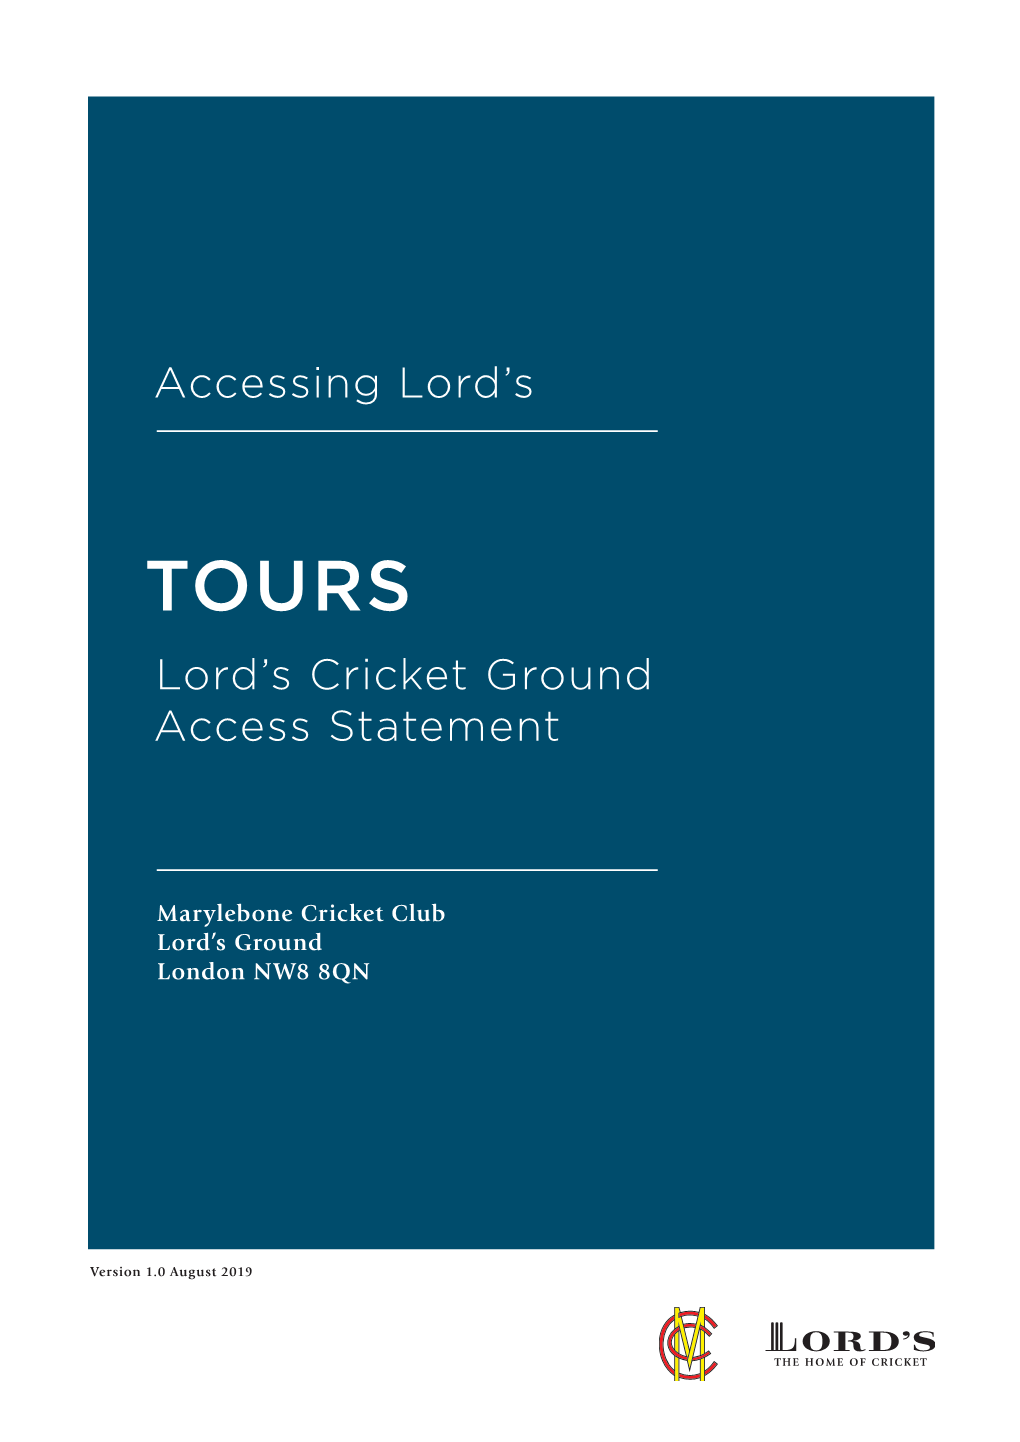 Accessing Lord's Lord's Cricket Ground Access Statement